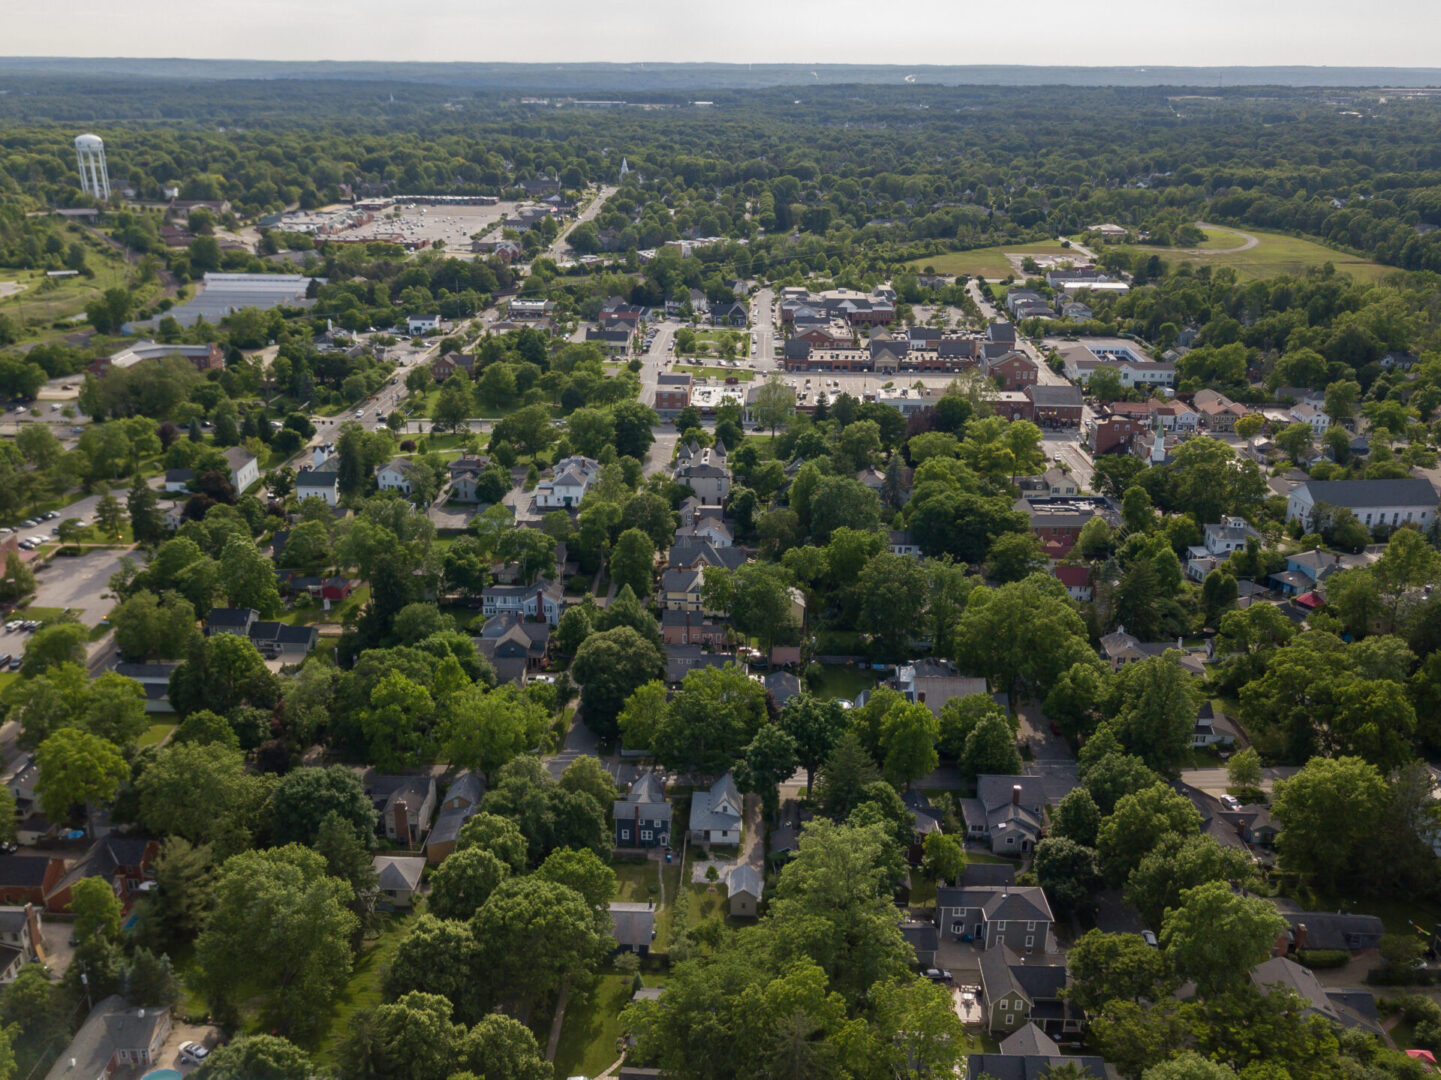 A bird 's eye view of the city of naperville.